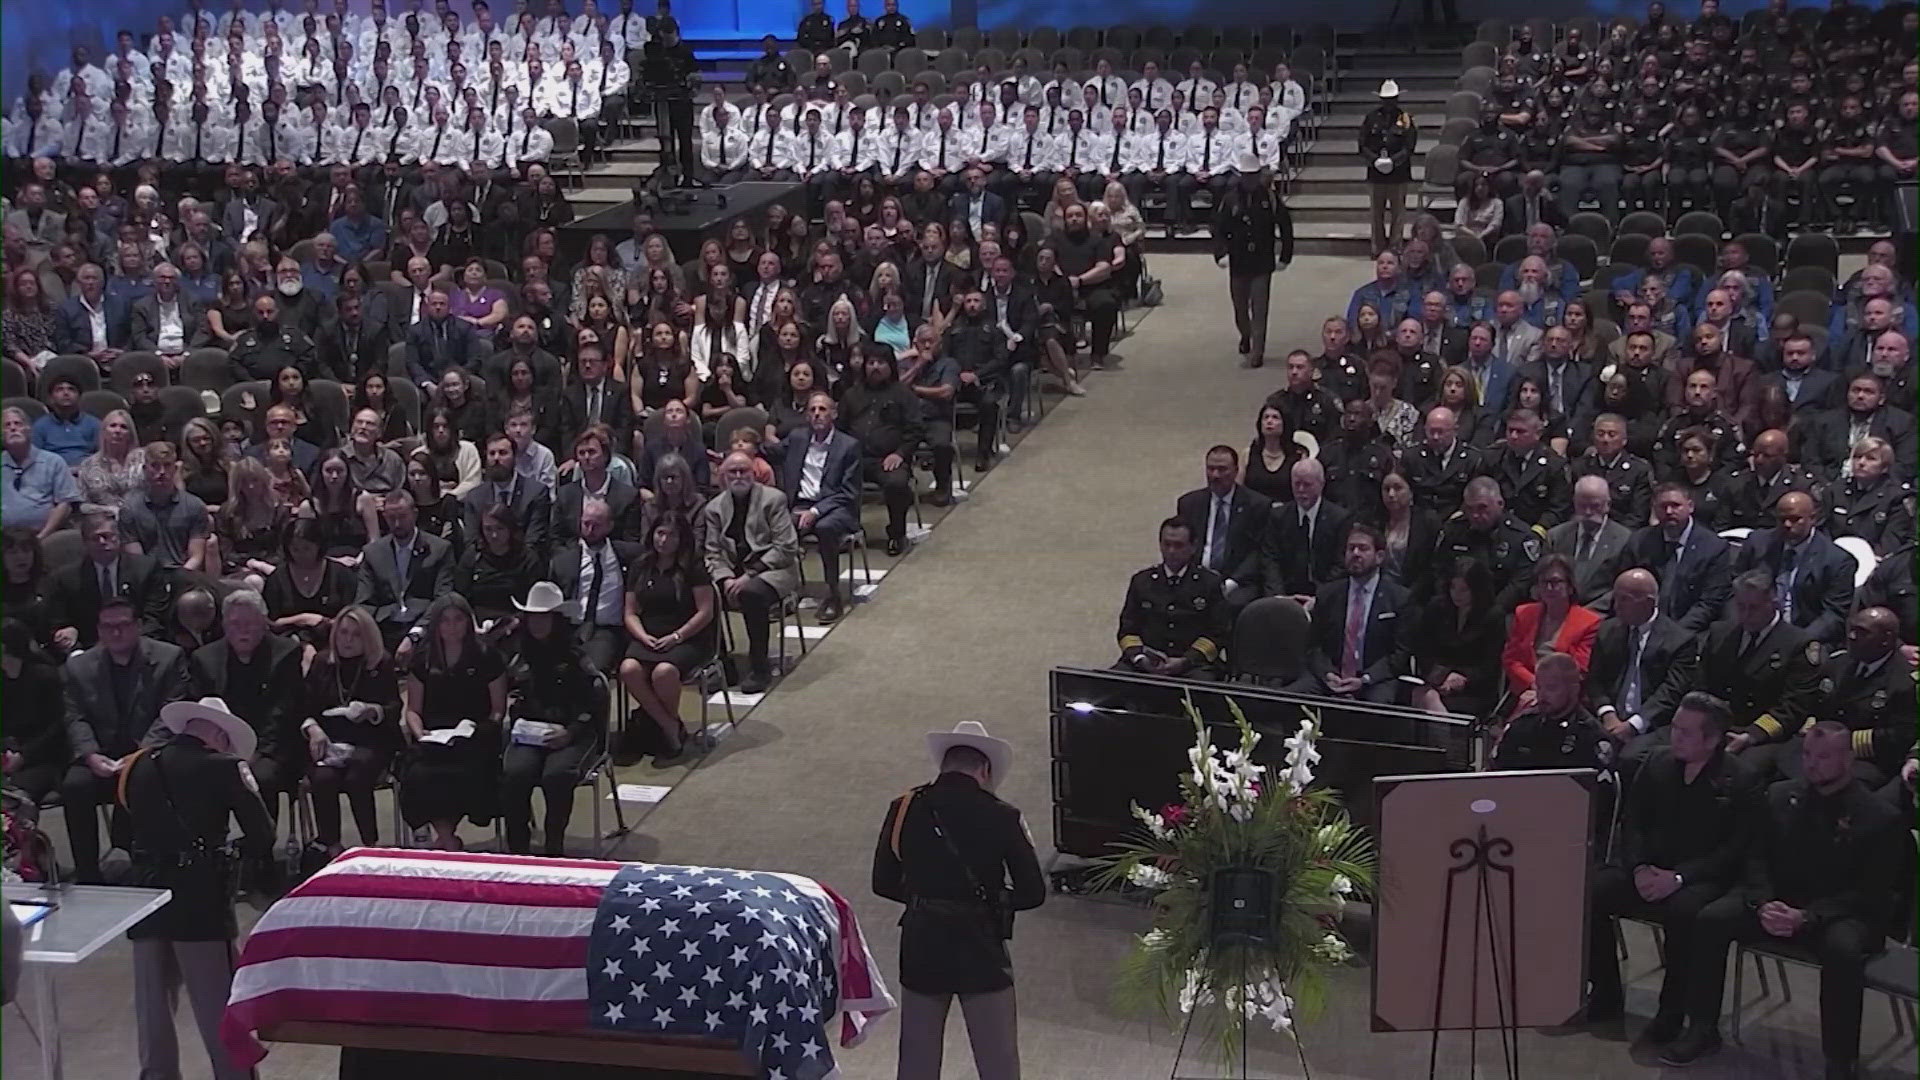 Harris County Deputy John Coddou was remembered as full of energy and humor.